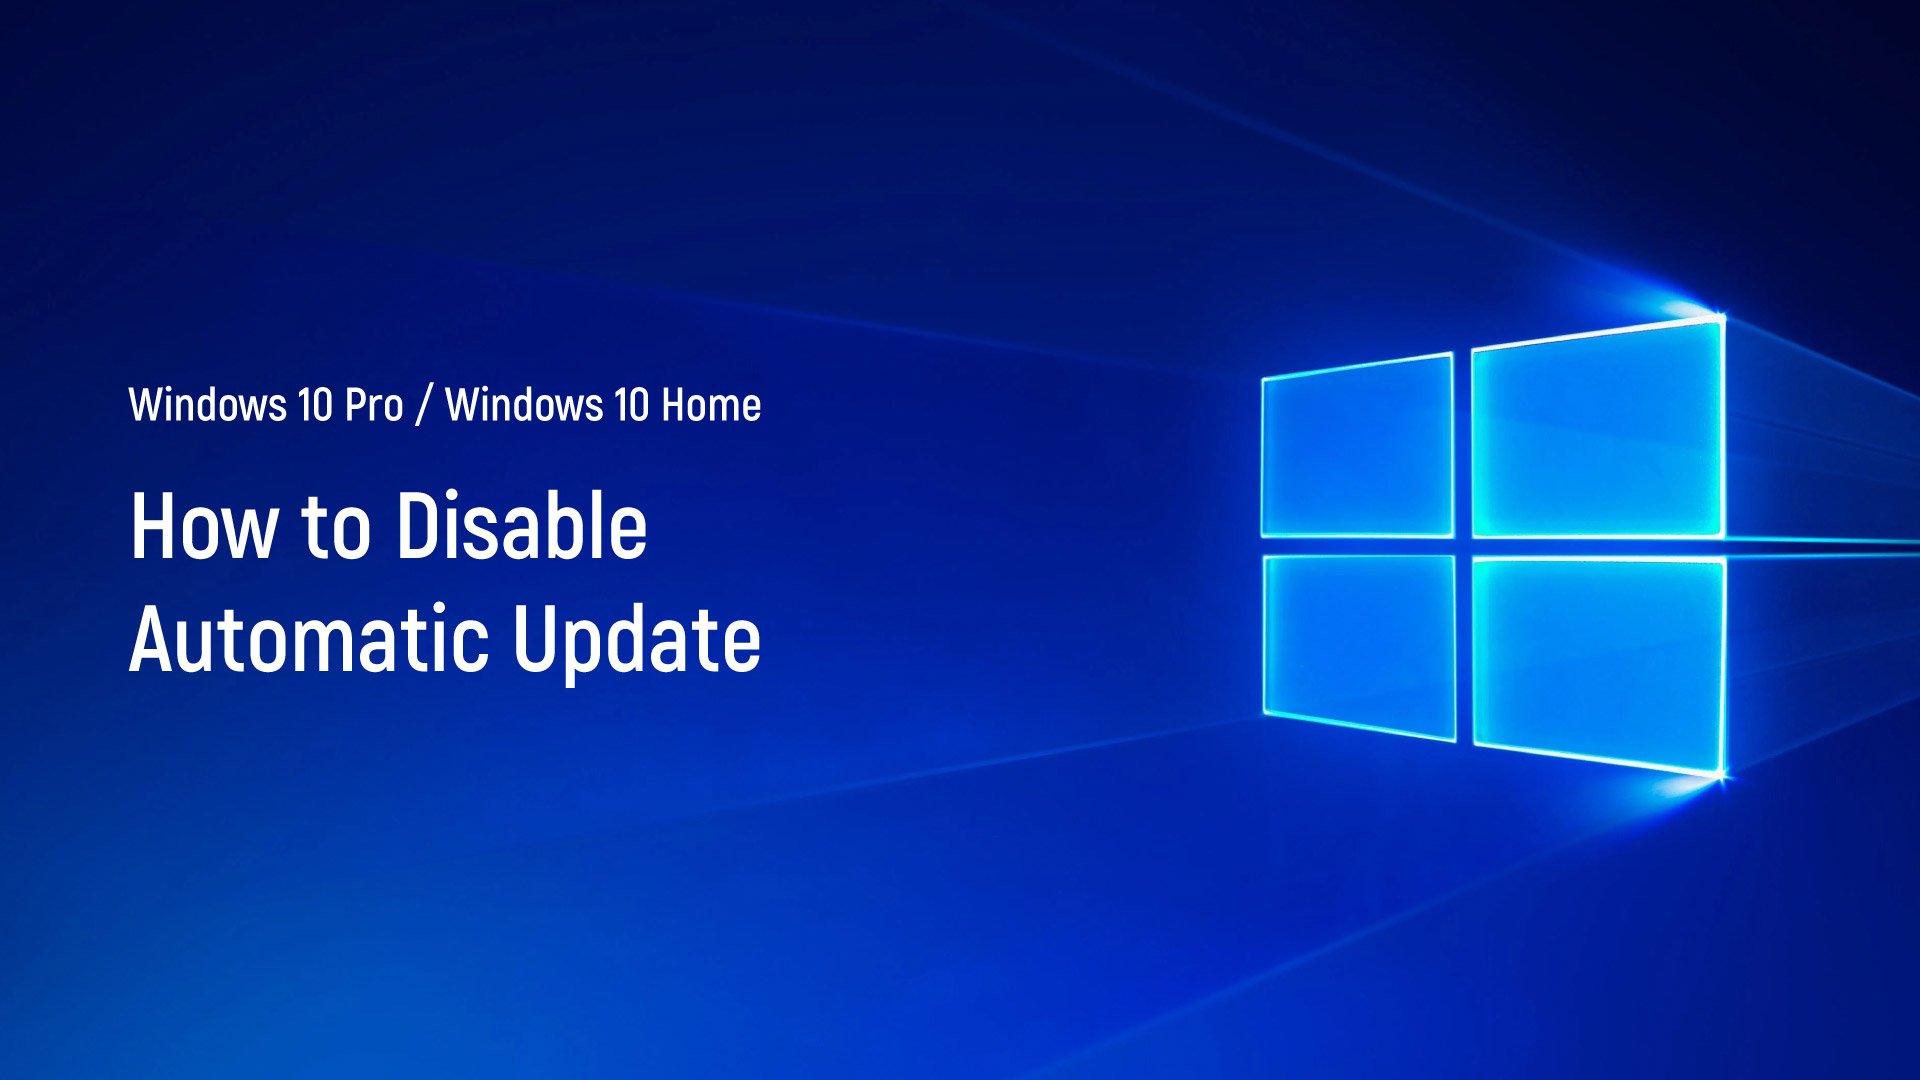 How to Disable Automatic Updates on Windows 10 Pro / Windows 10 Home